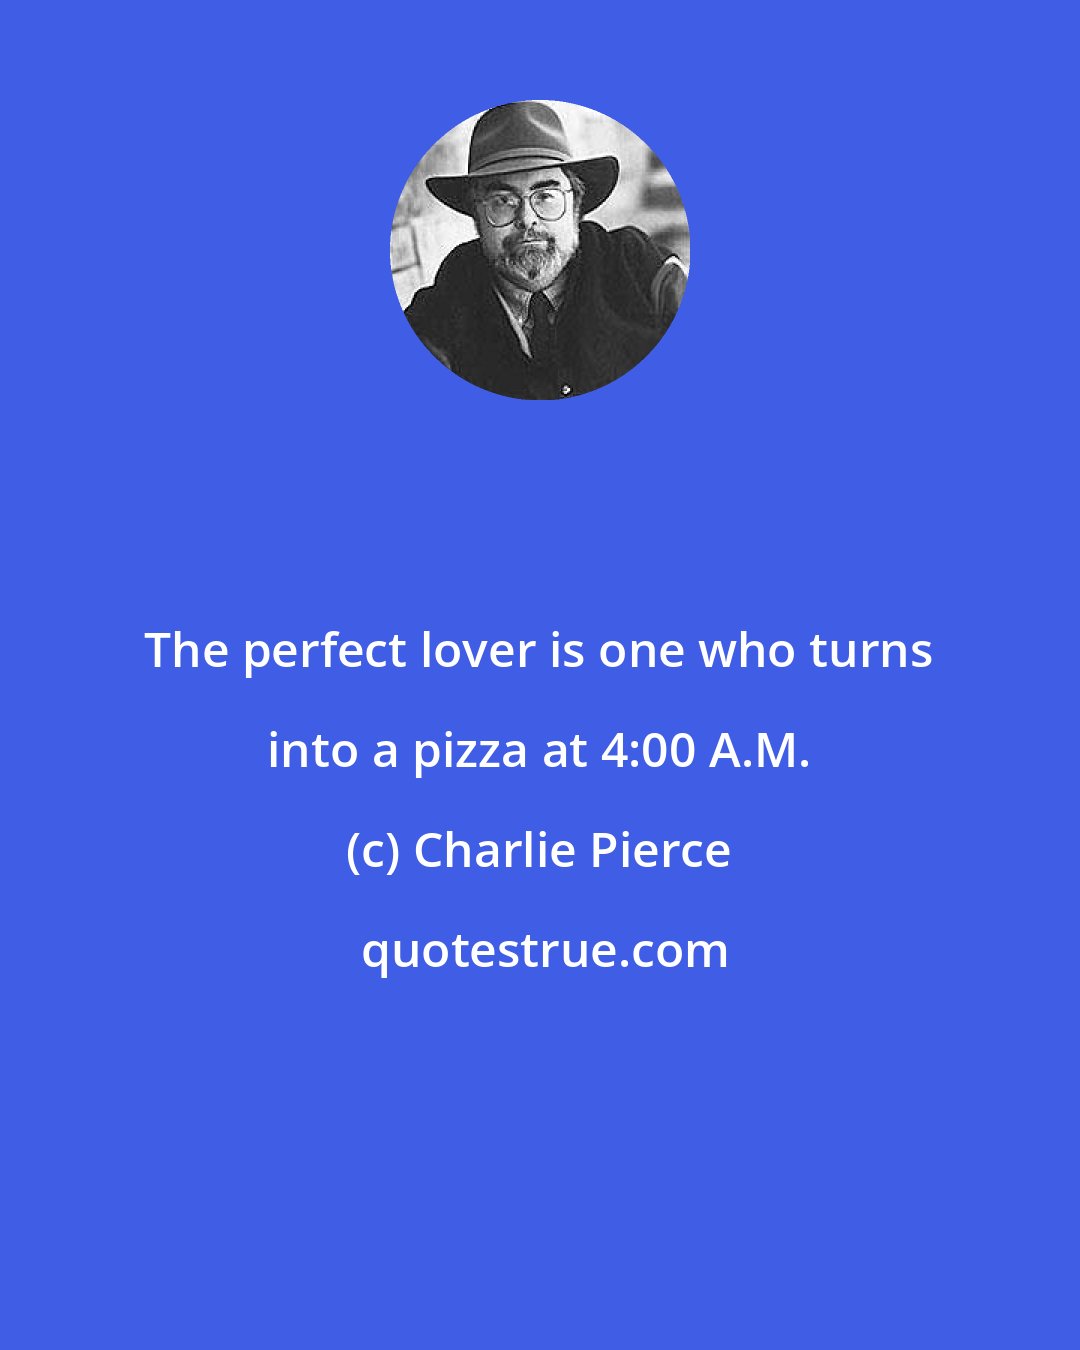 Charlie Pierce: The perfect lover is one who turns into a pizza at 4:00 A.M.